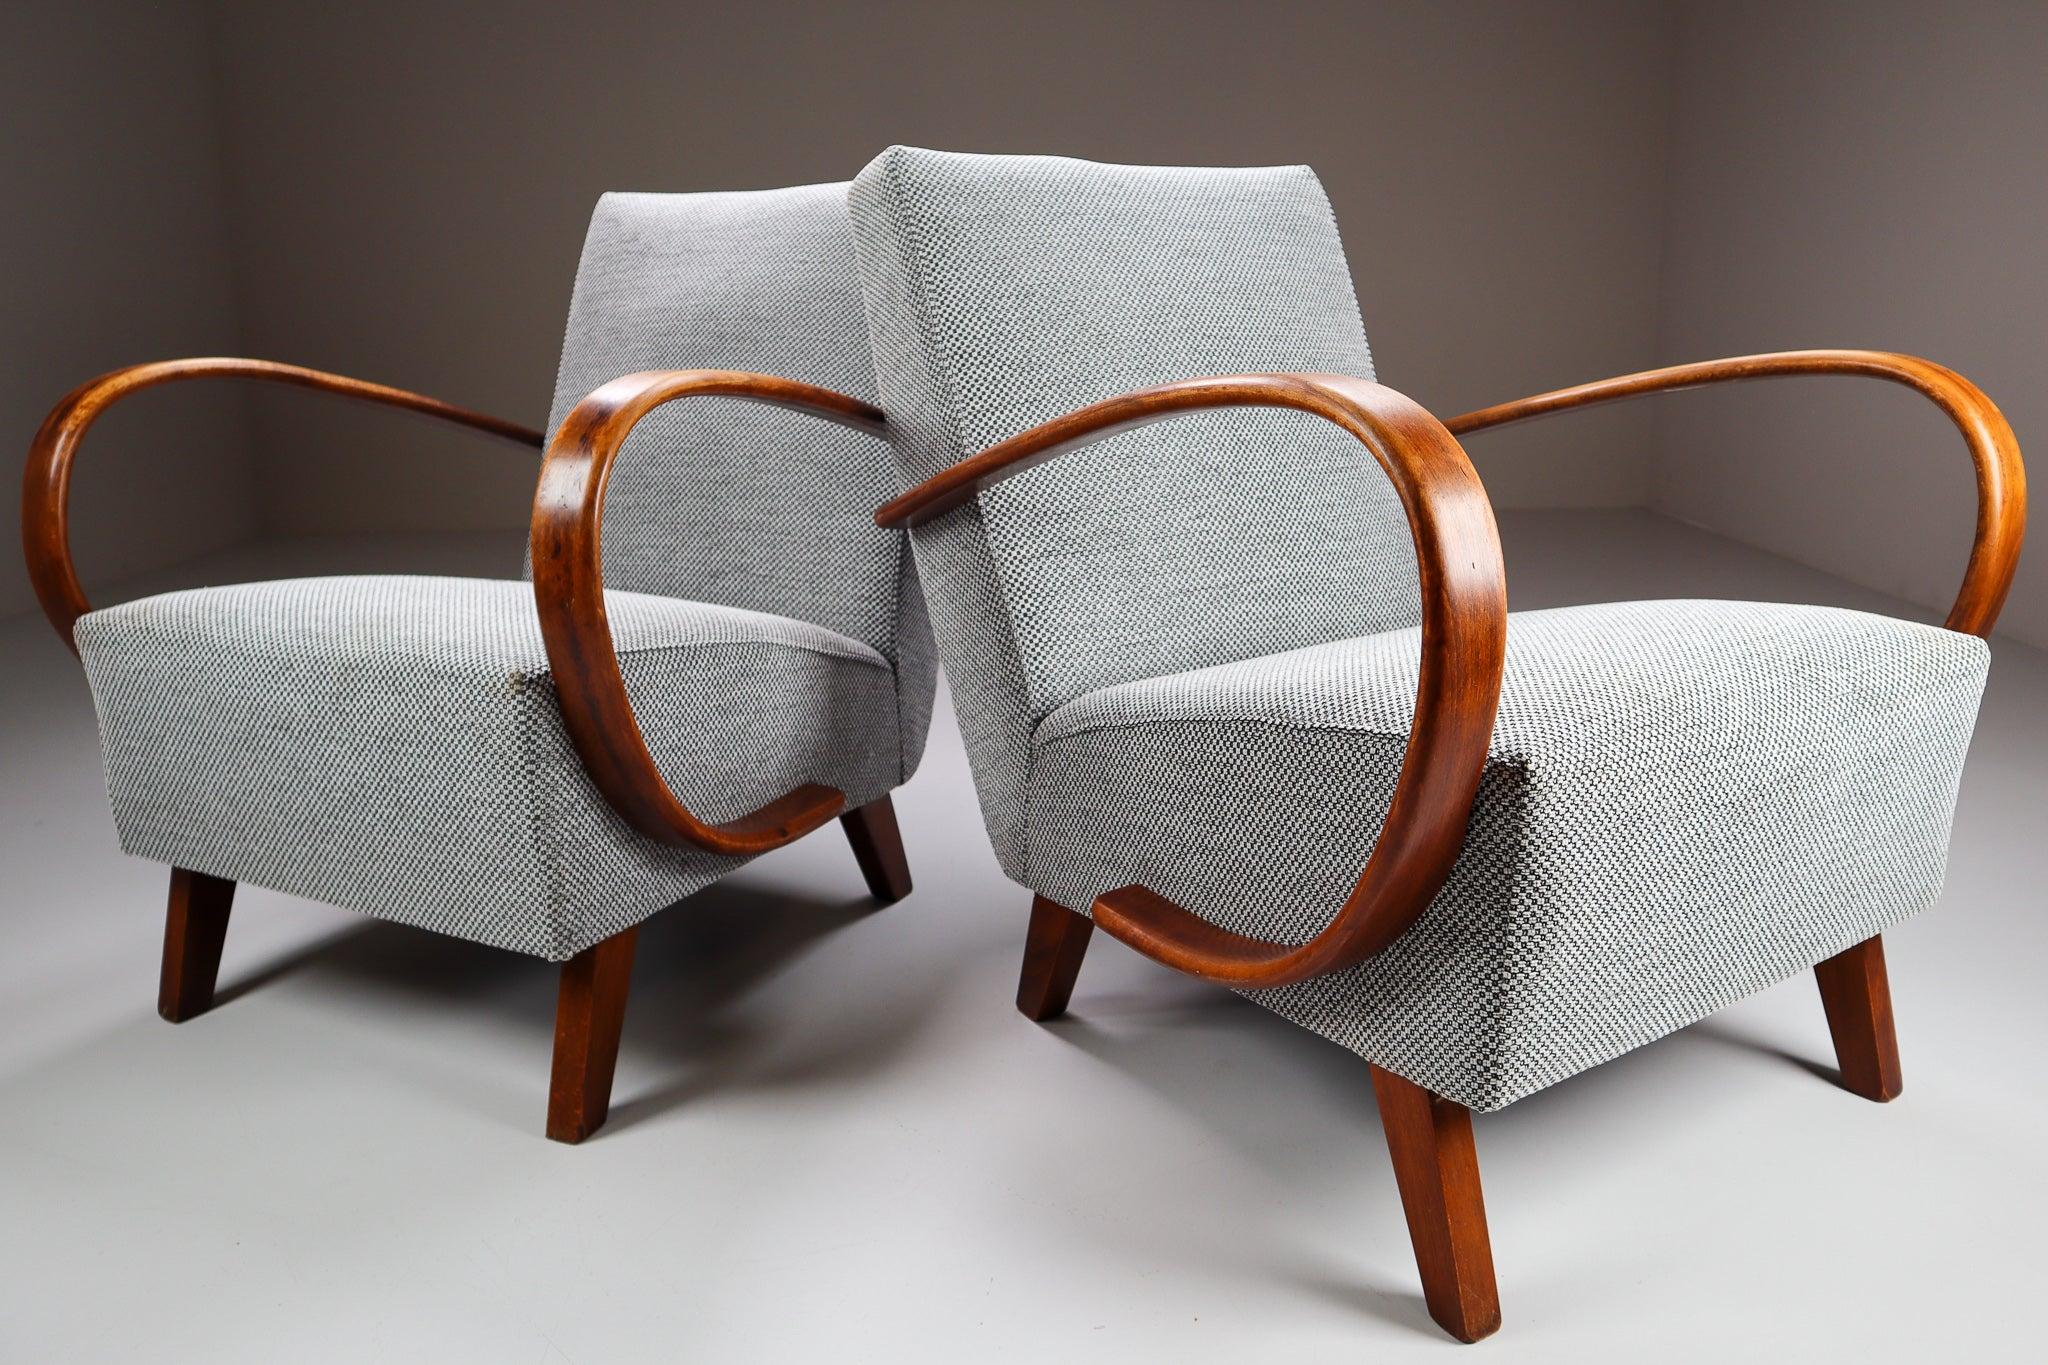 These iconic set chairs hail from Czechia, circa 1940. Produced by Thonet, these chairs (model H-227) designed by Jindrich Halabala, are a benchmark for midcentury design in Central Europe. A simple and elegant geometry contrasts the soft and